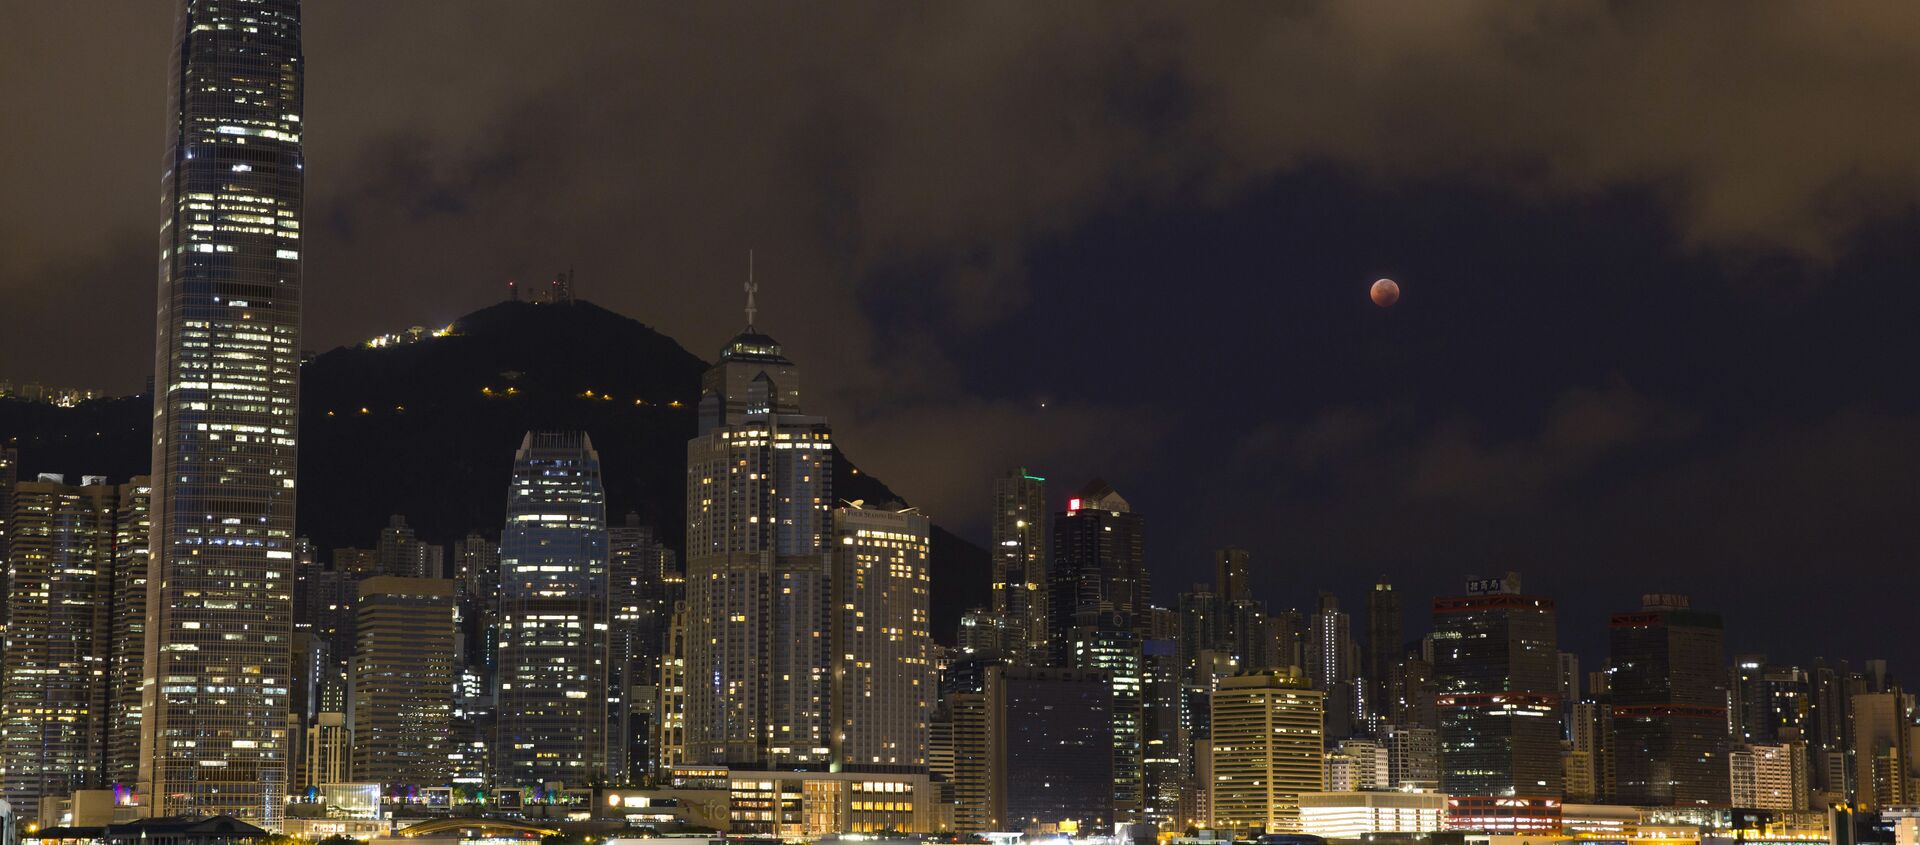 A full moon rises over the Victoria Harbour during a complete lunar eclipse, in Hong Kong, Saturday, July 28, 2018. Skywatchers around much of the world are looking forward to a complete lunar eclipse that will be the longest this century. - Sputnik International, 1920, 07.10.2018